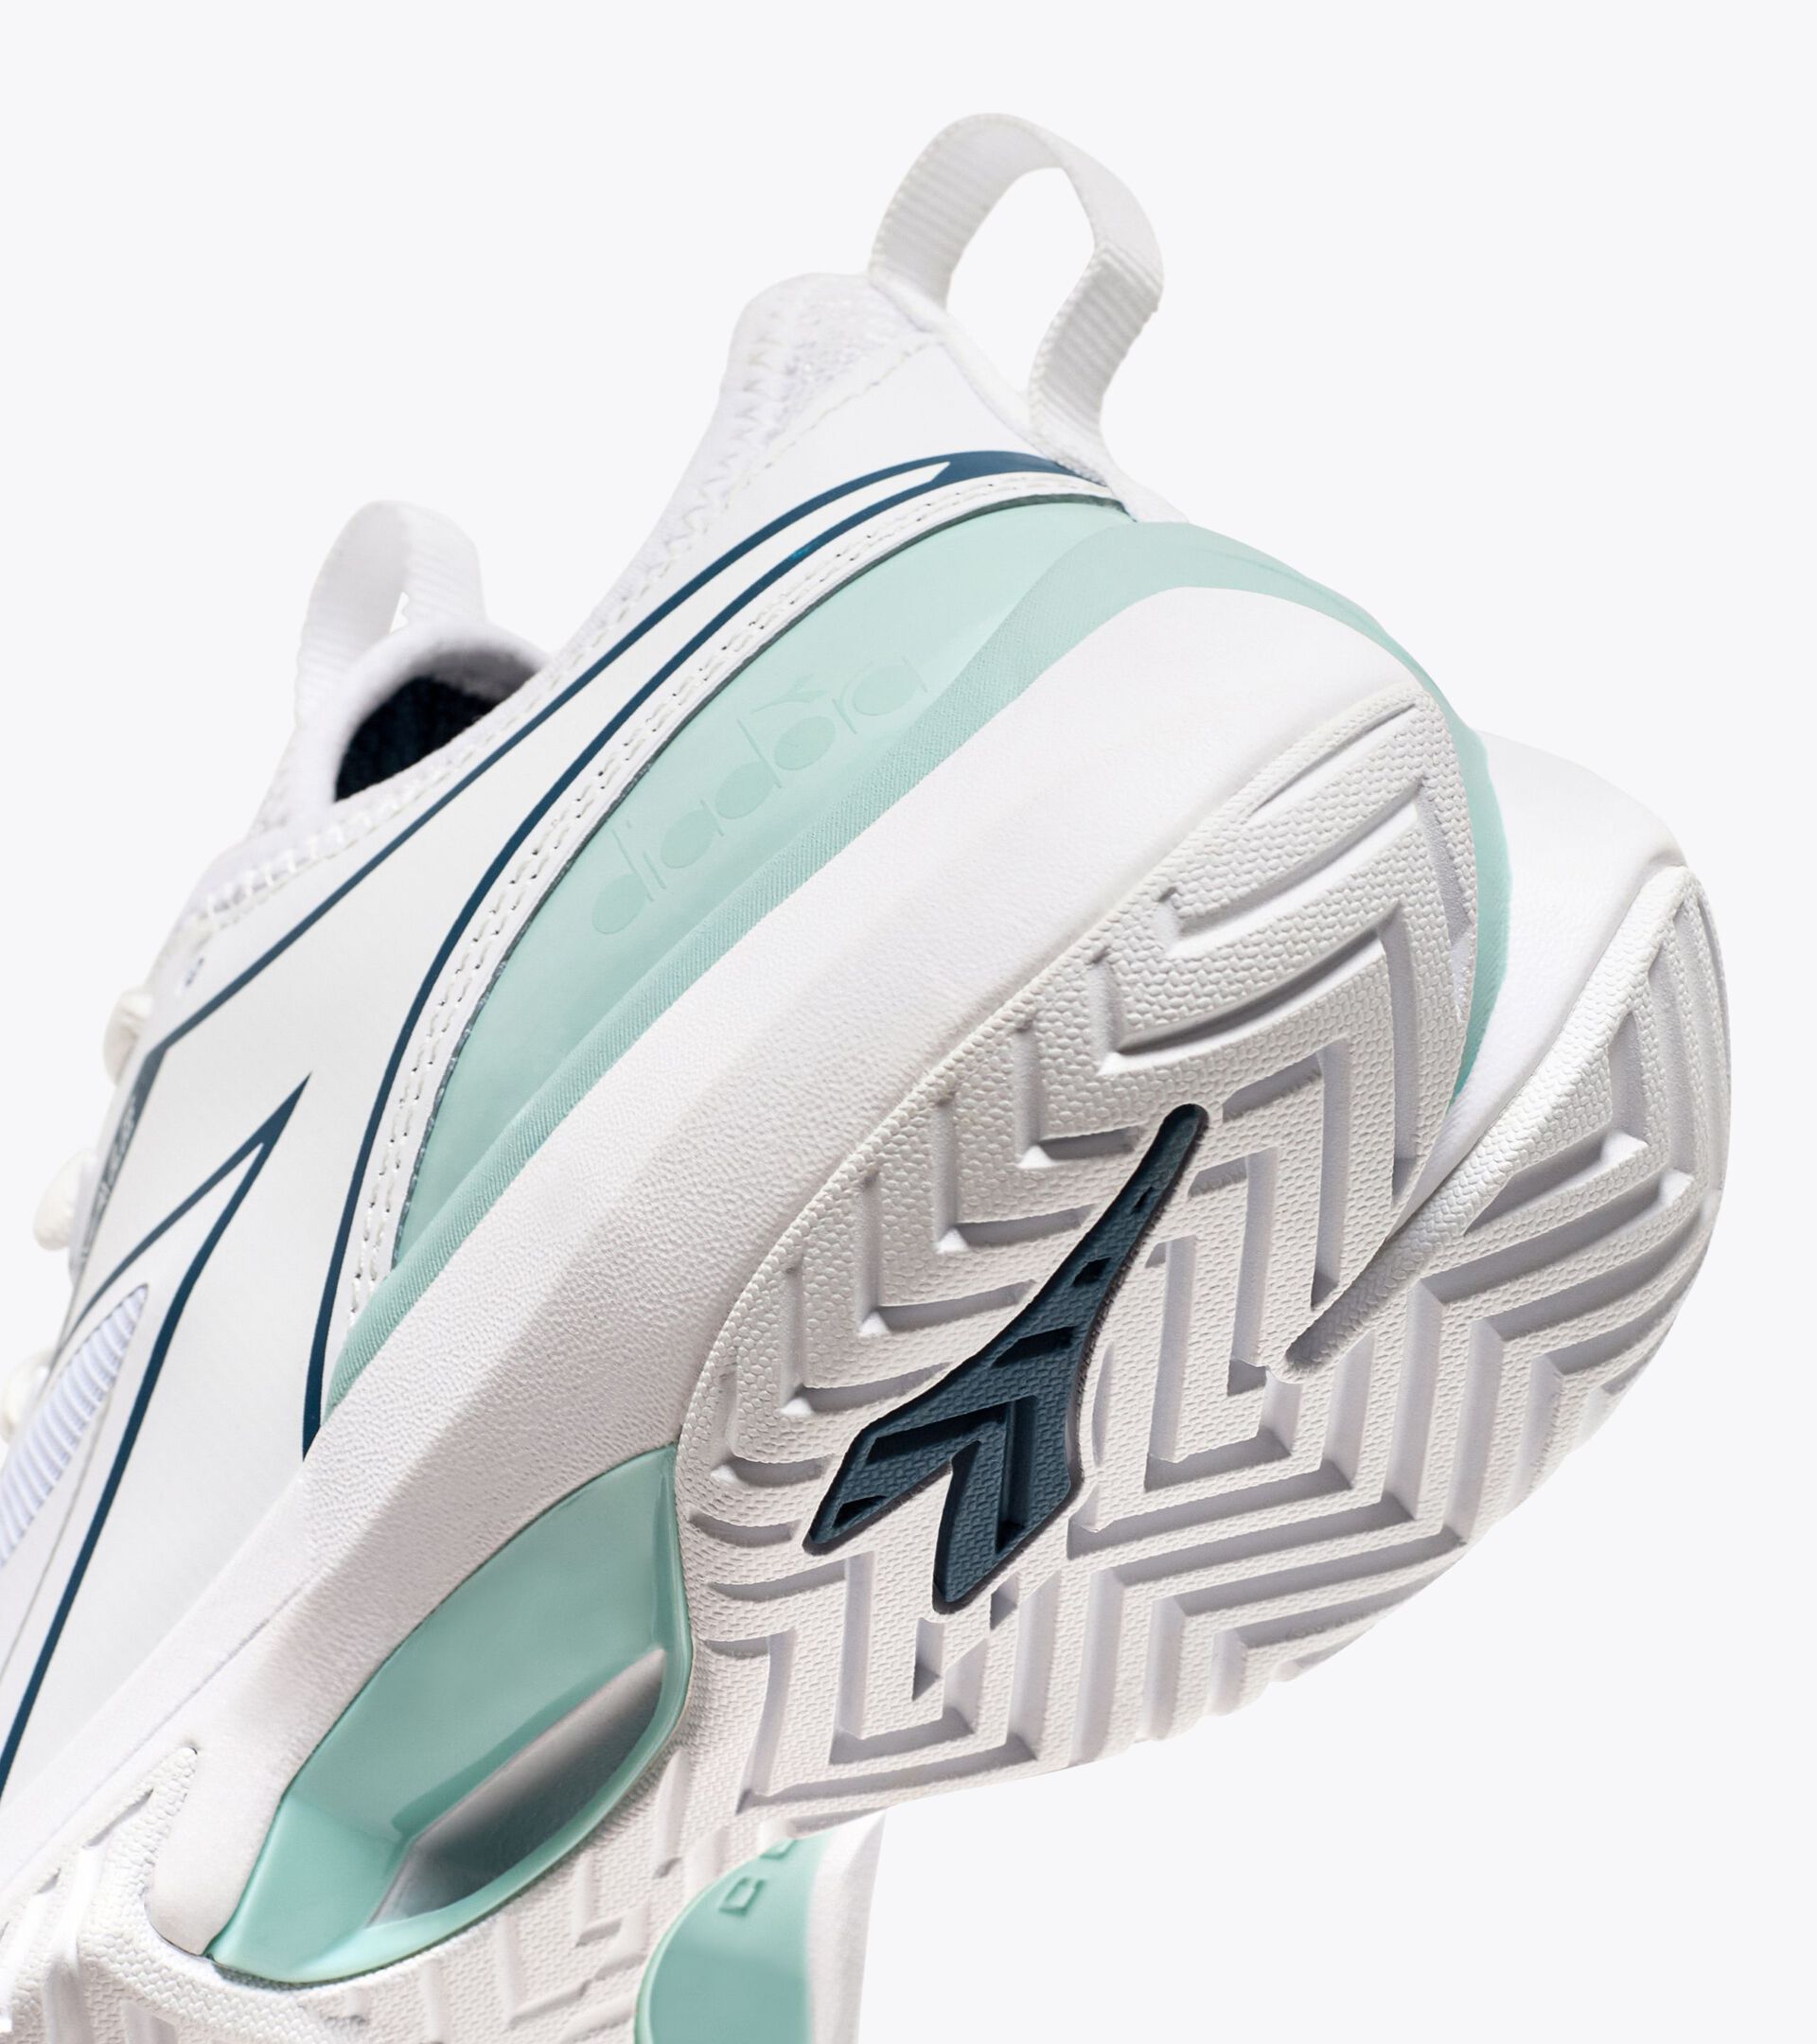 Tennis shoes for hard surfaces or clay courts - Women FINALE W AG WHITE/LEGION BLUE/SURF SPRAY - Diadora